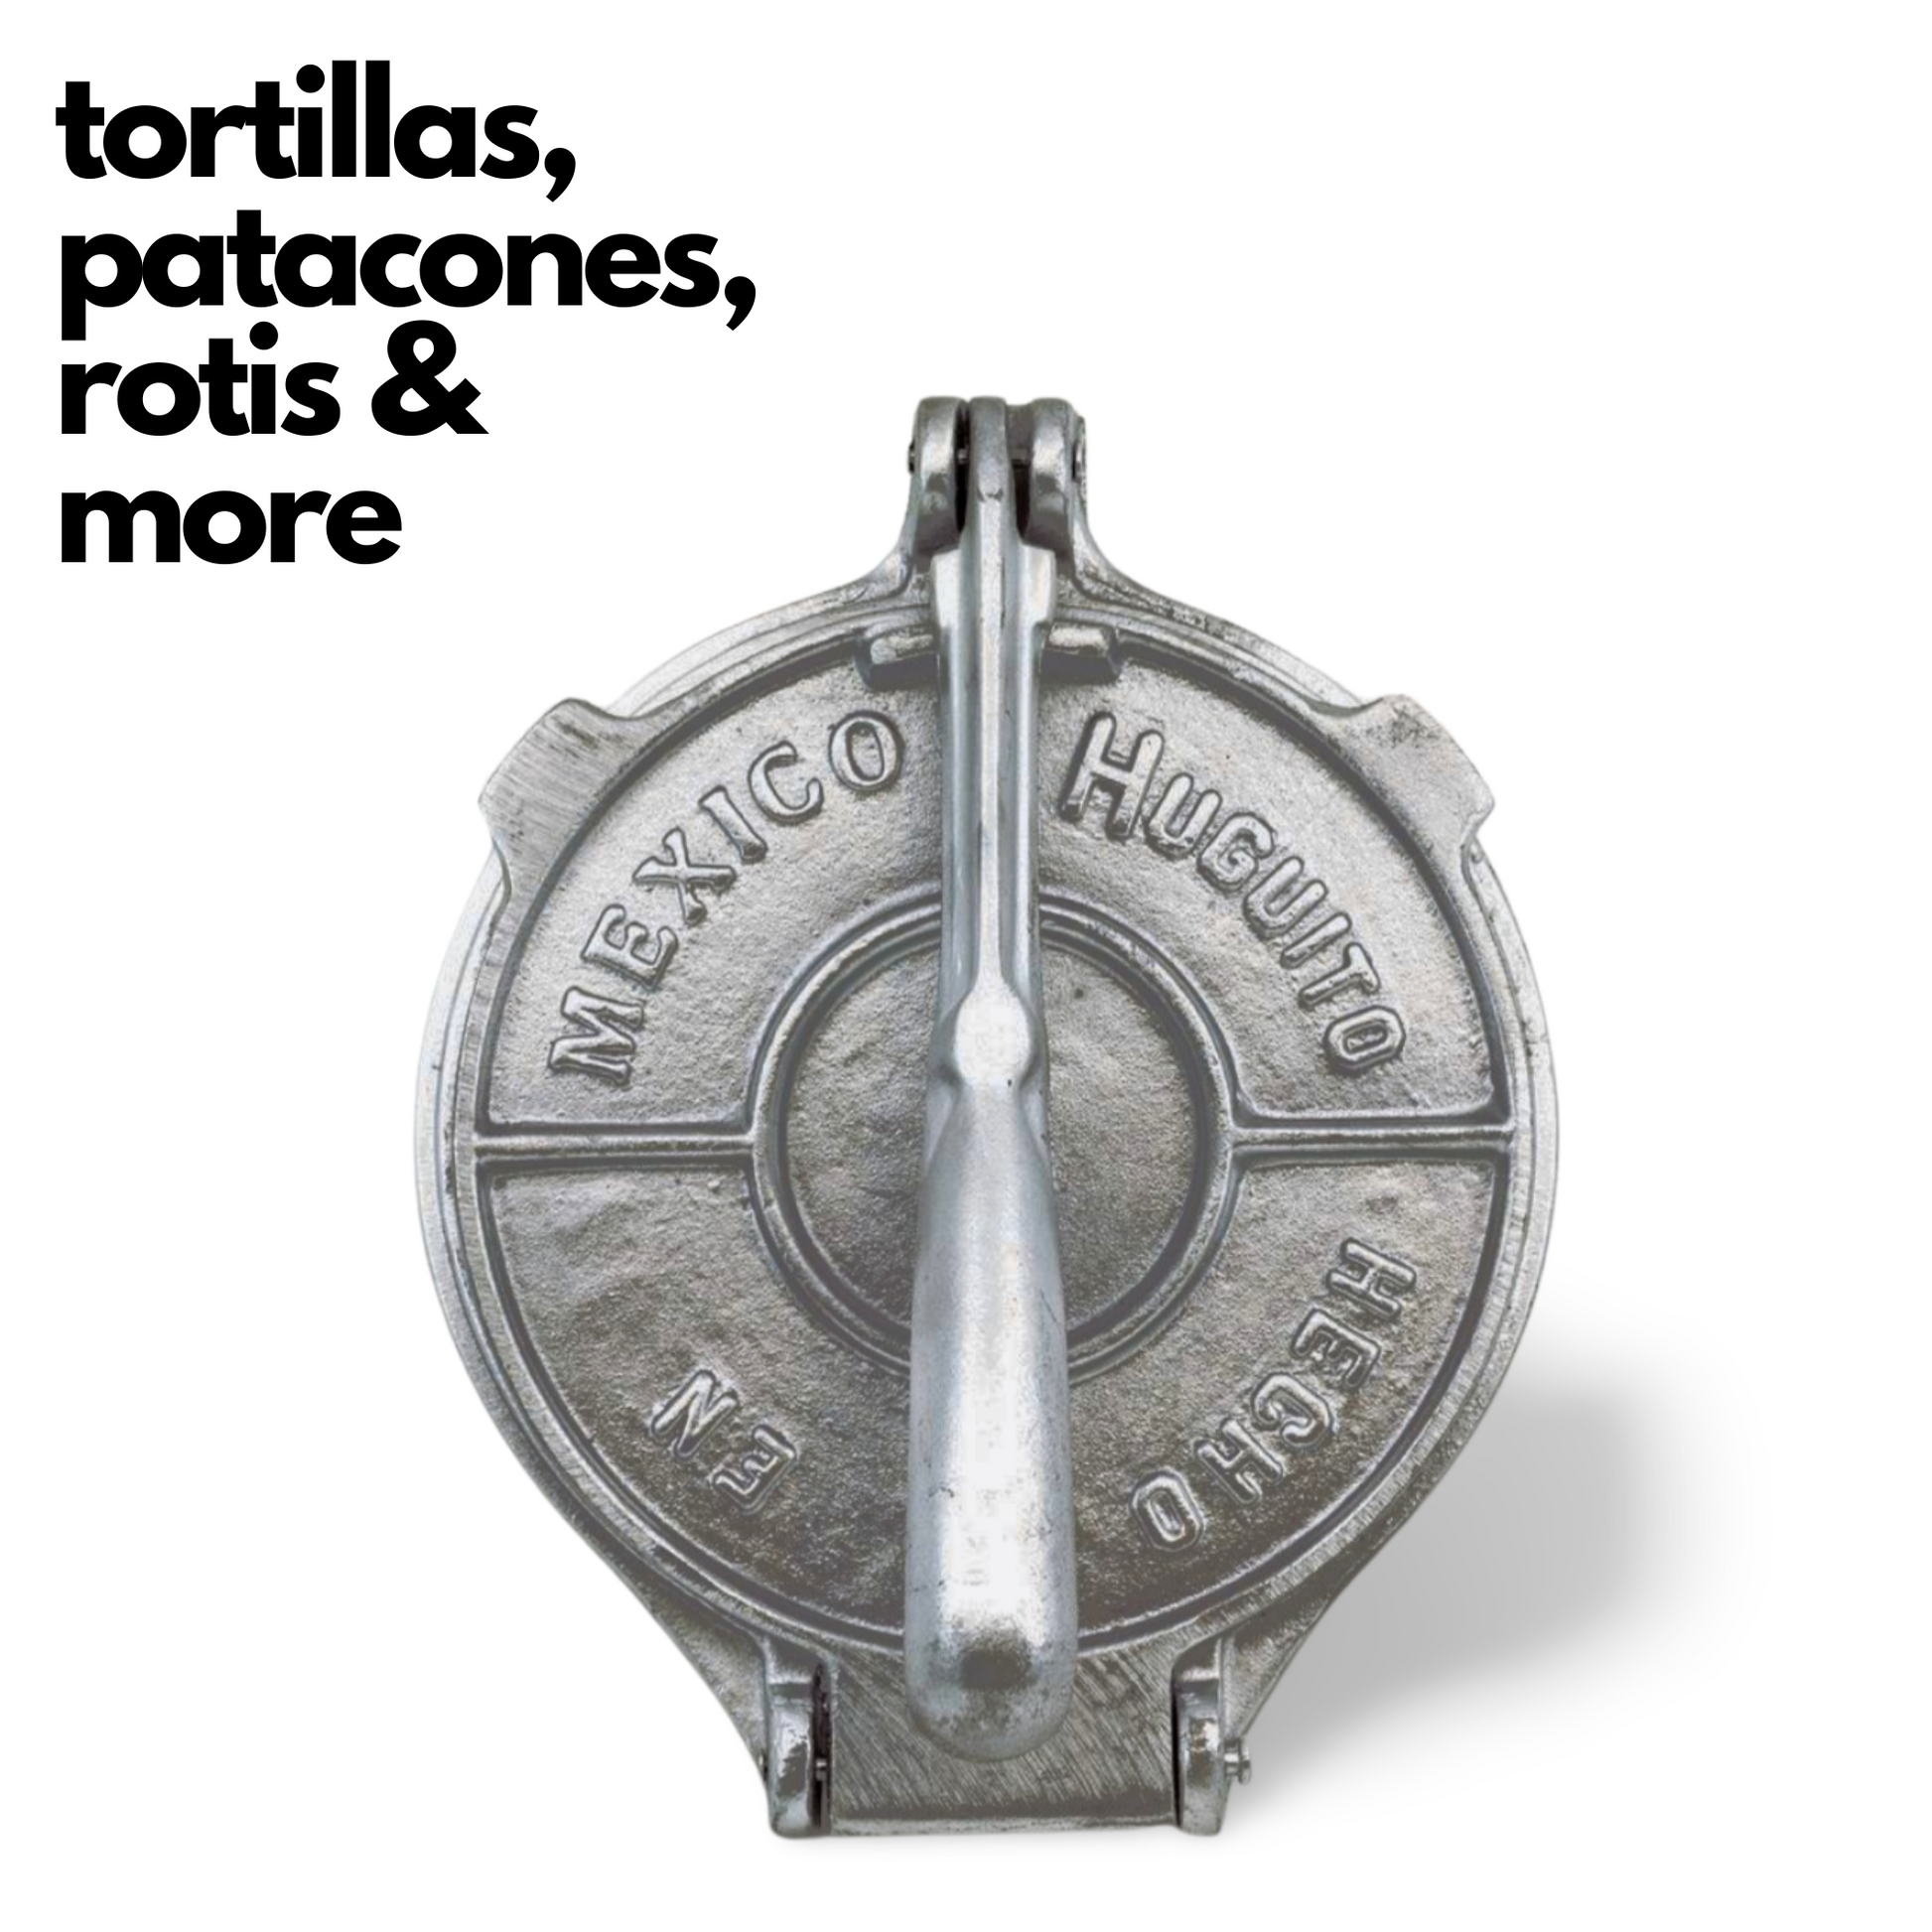 Authentic Mexican 7" Tortilla Press hand-casted in heavyweight aluminum for easy and even pressing.